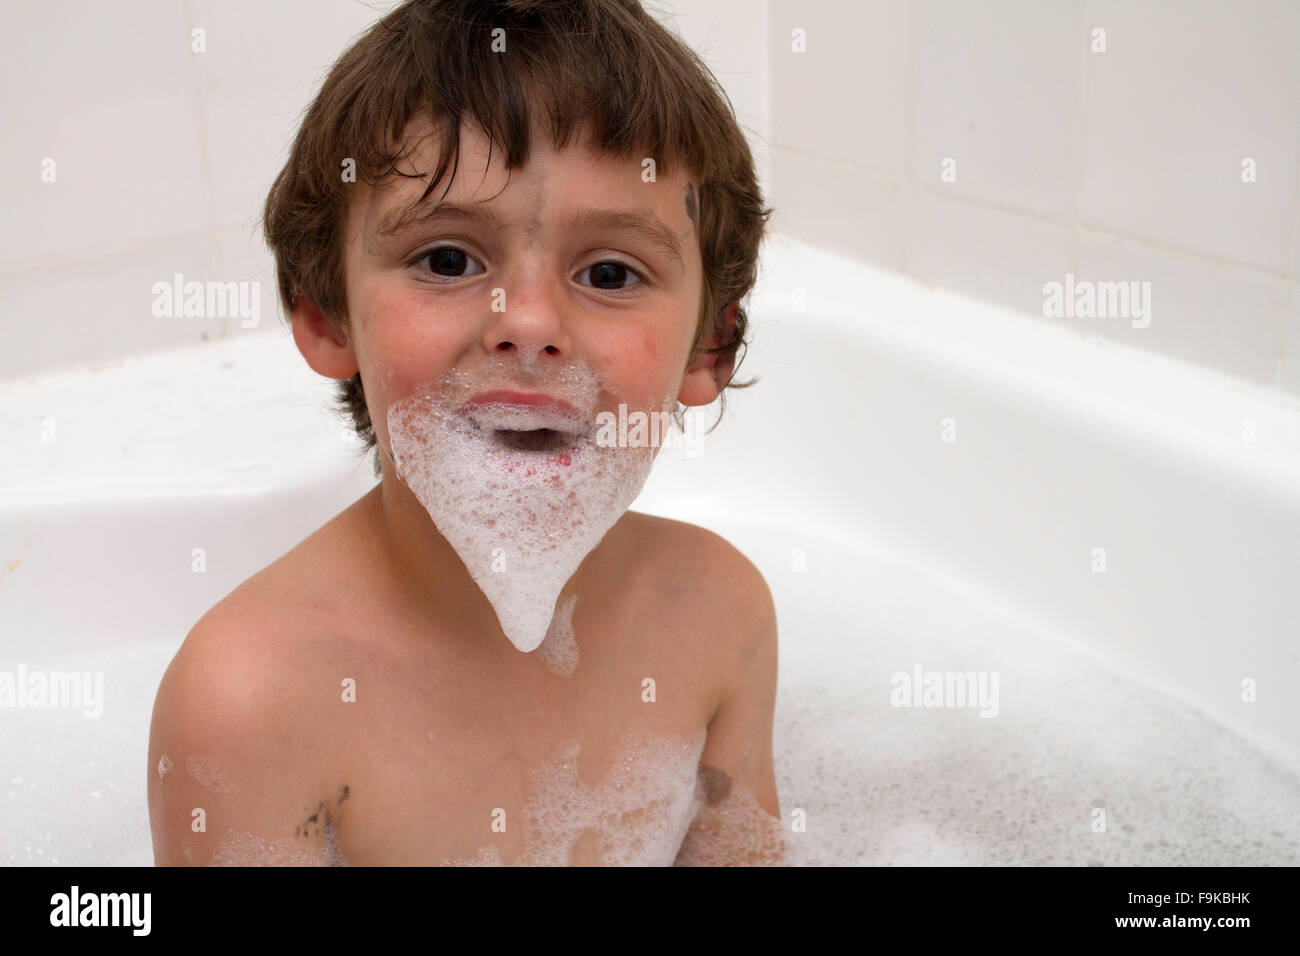 Toddler boy (5 years old) having fun with bubbles in the bath. Stock Photo